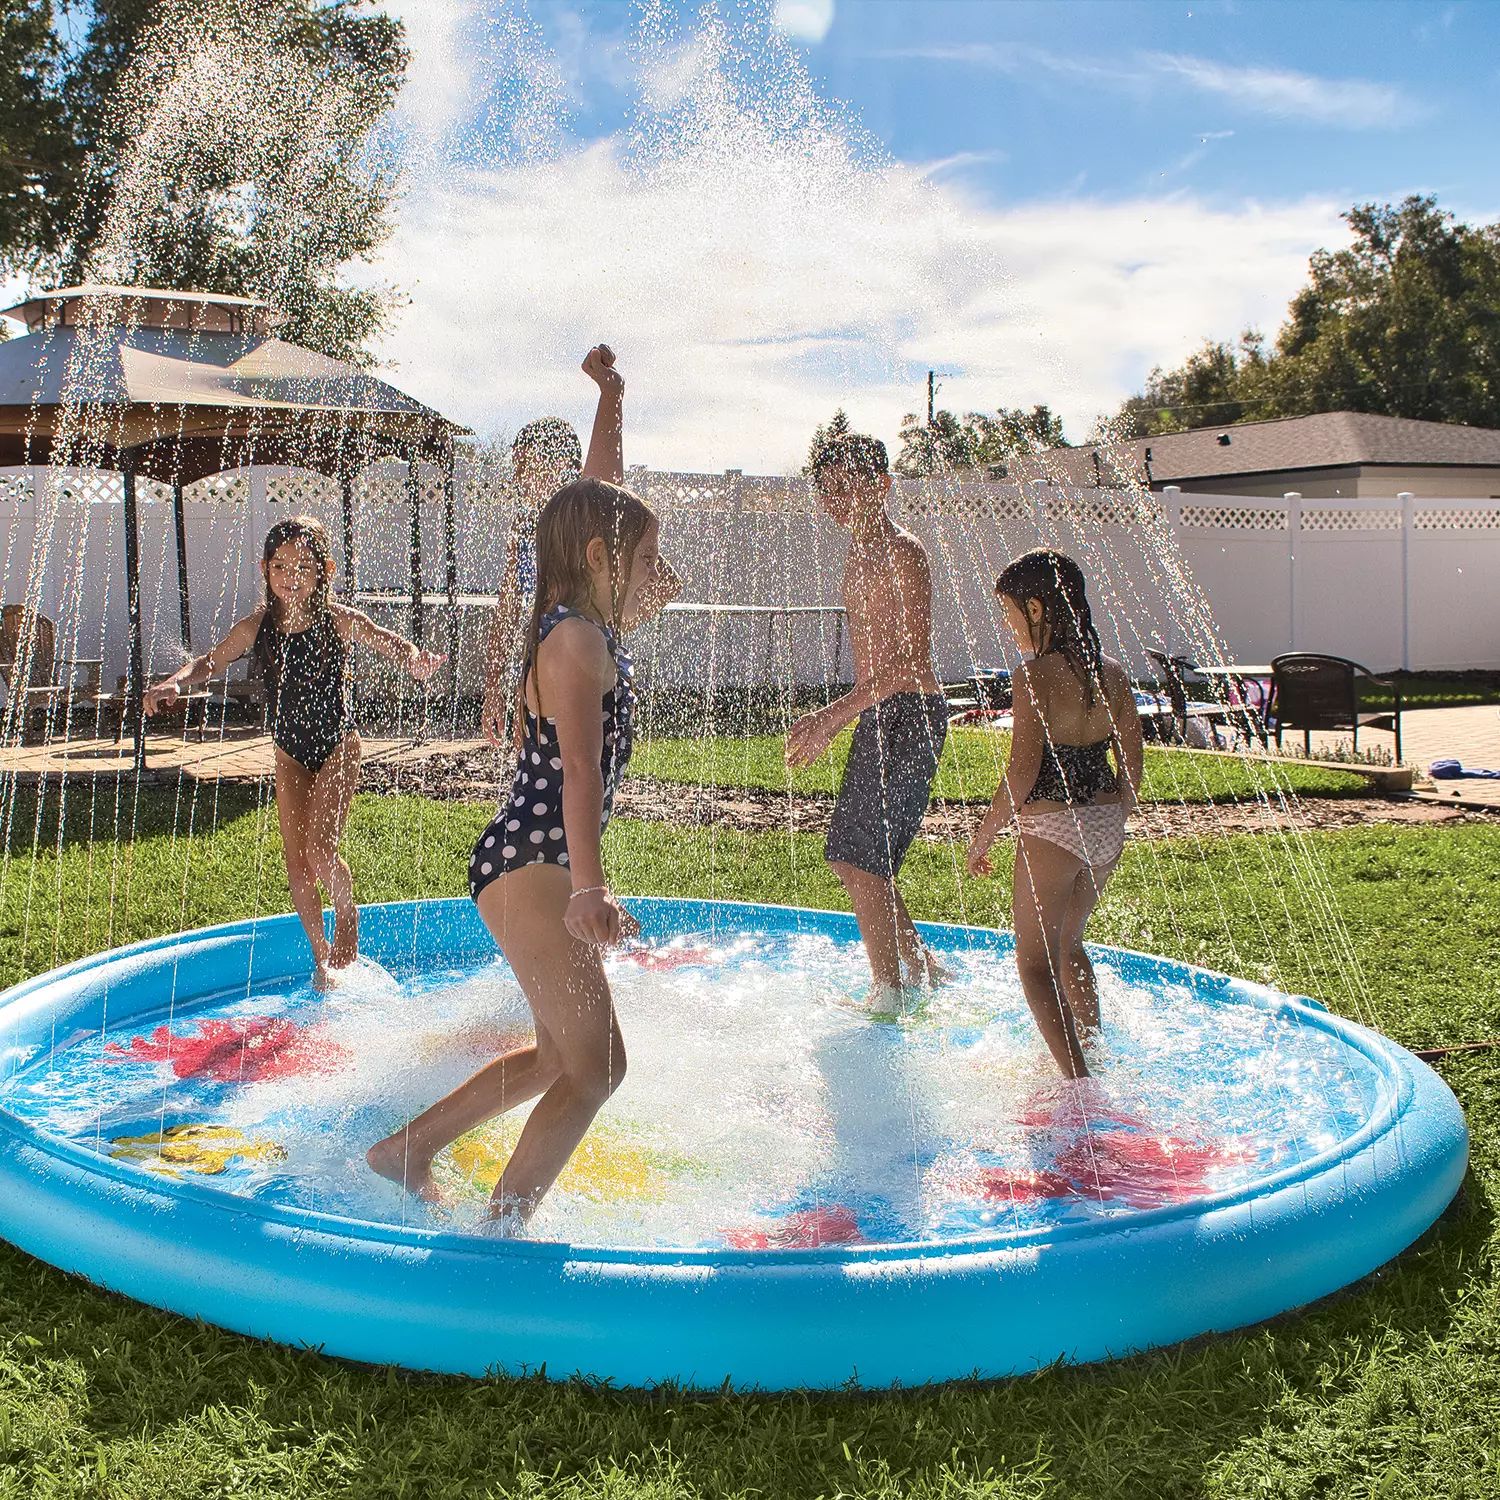 Giant Splash Pad Inflatable 10 Ft Diameter Wading Pool with Sprinkler by WOW World of Watersports | Sam's Club